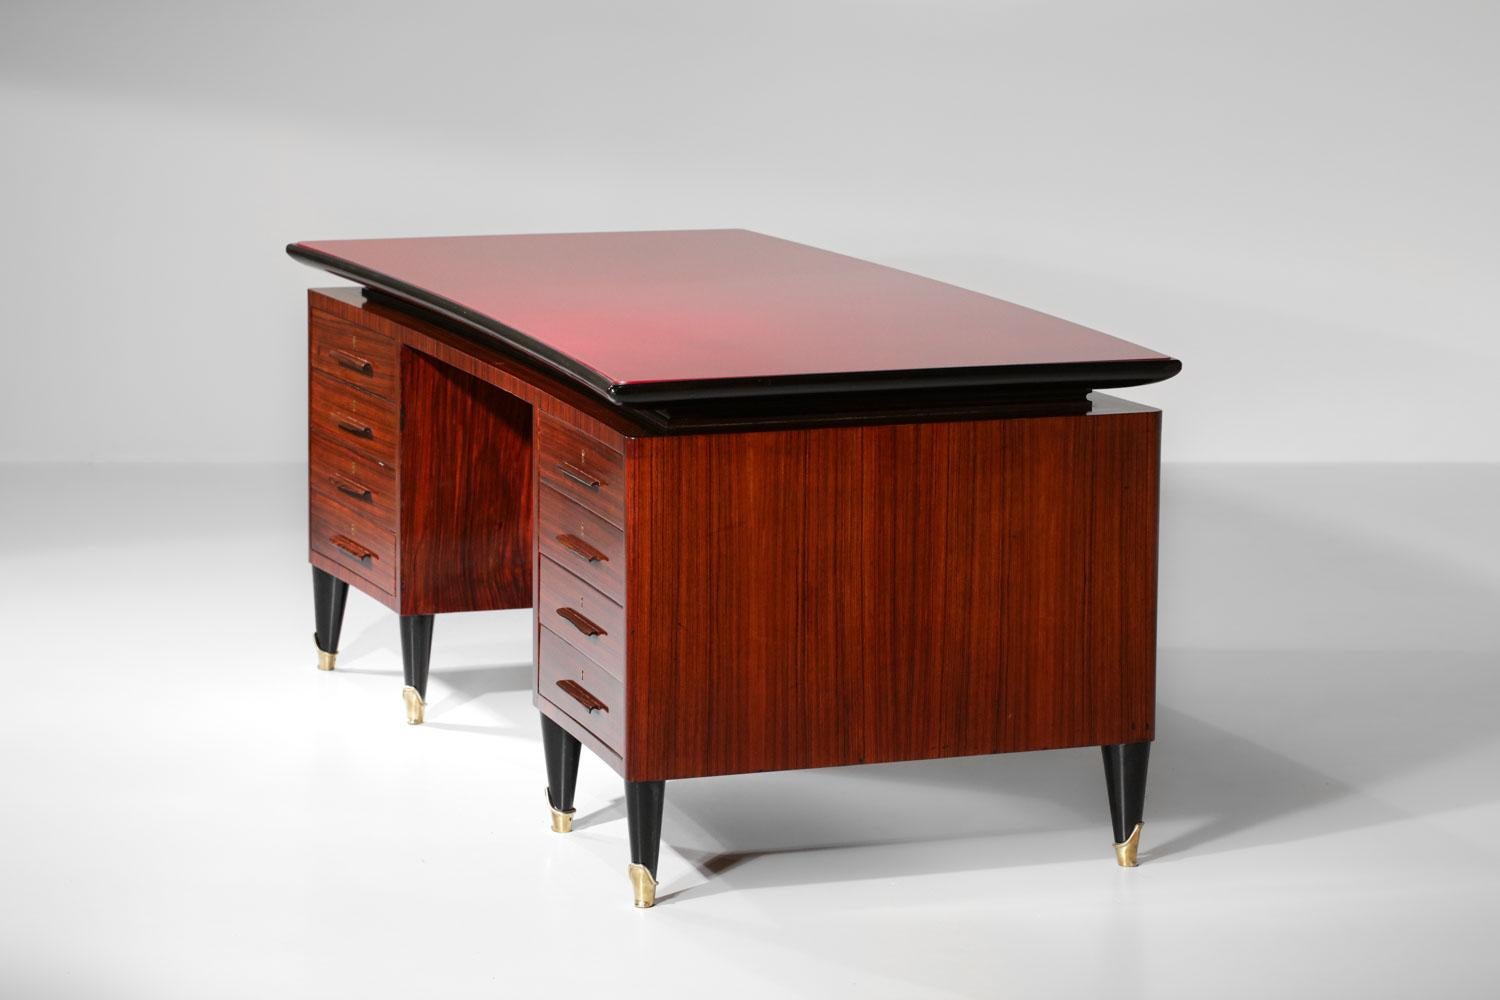 Italian large Desk by Vittorio Dassi solid wood and glass 60s - G725 For Sale 2